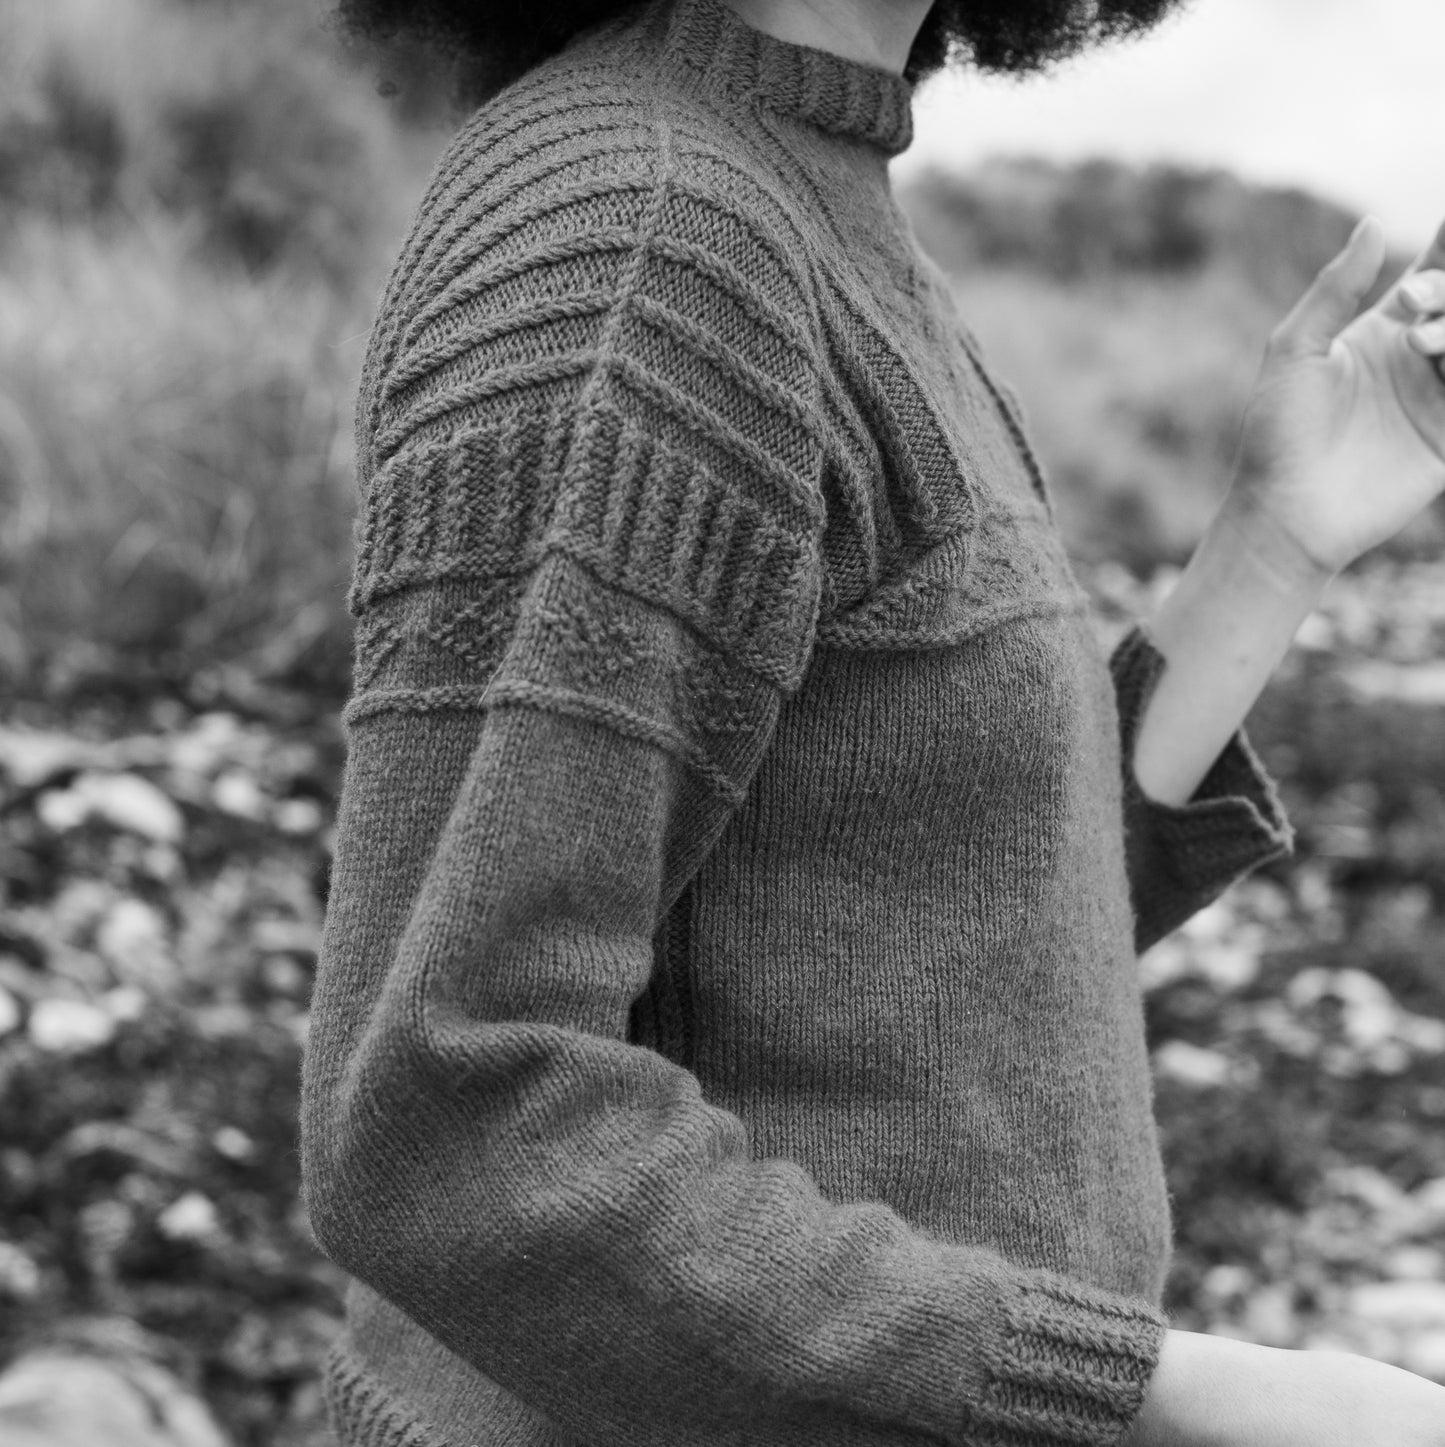 Knit Along with Betsan Corkhill, Di Gilpin and Sheila Greenwell, Donna Wilson, Lesley O'Connell Edwards, Lynn Abrams, Hélène Magnússon, John Arbon Textiles, Amy Swanson of June Cashmere, Vawn Corrigan